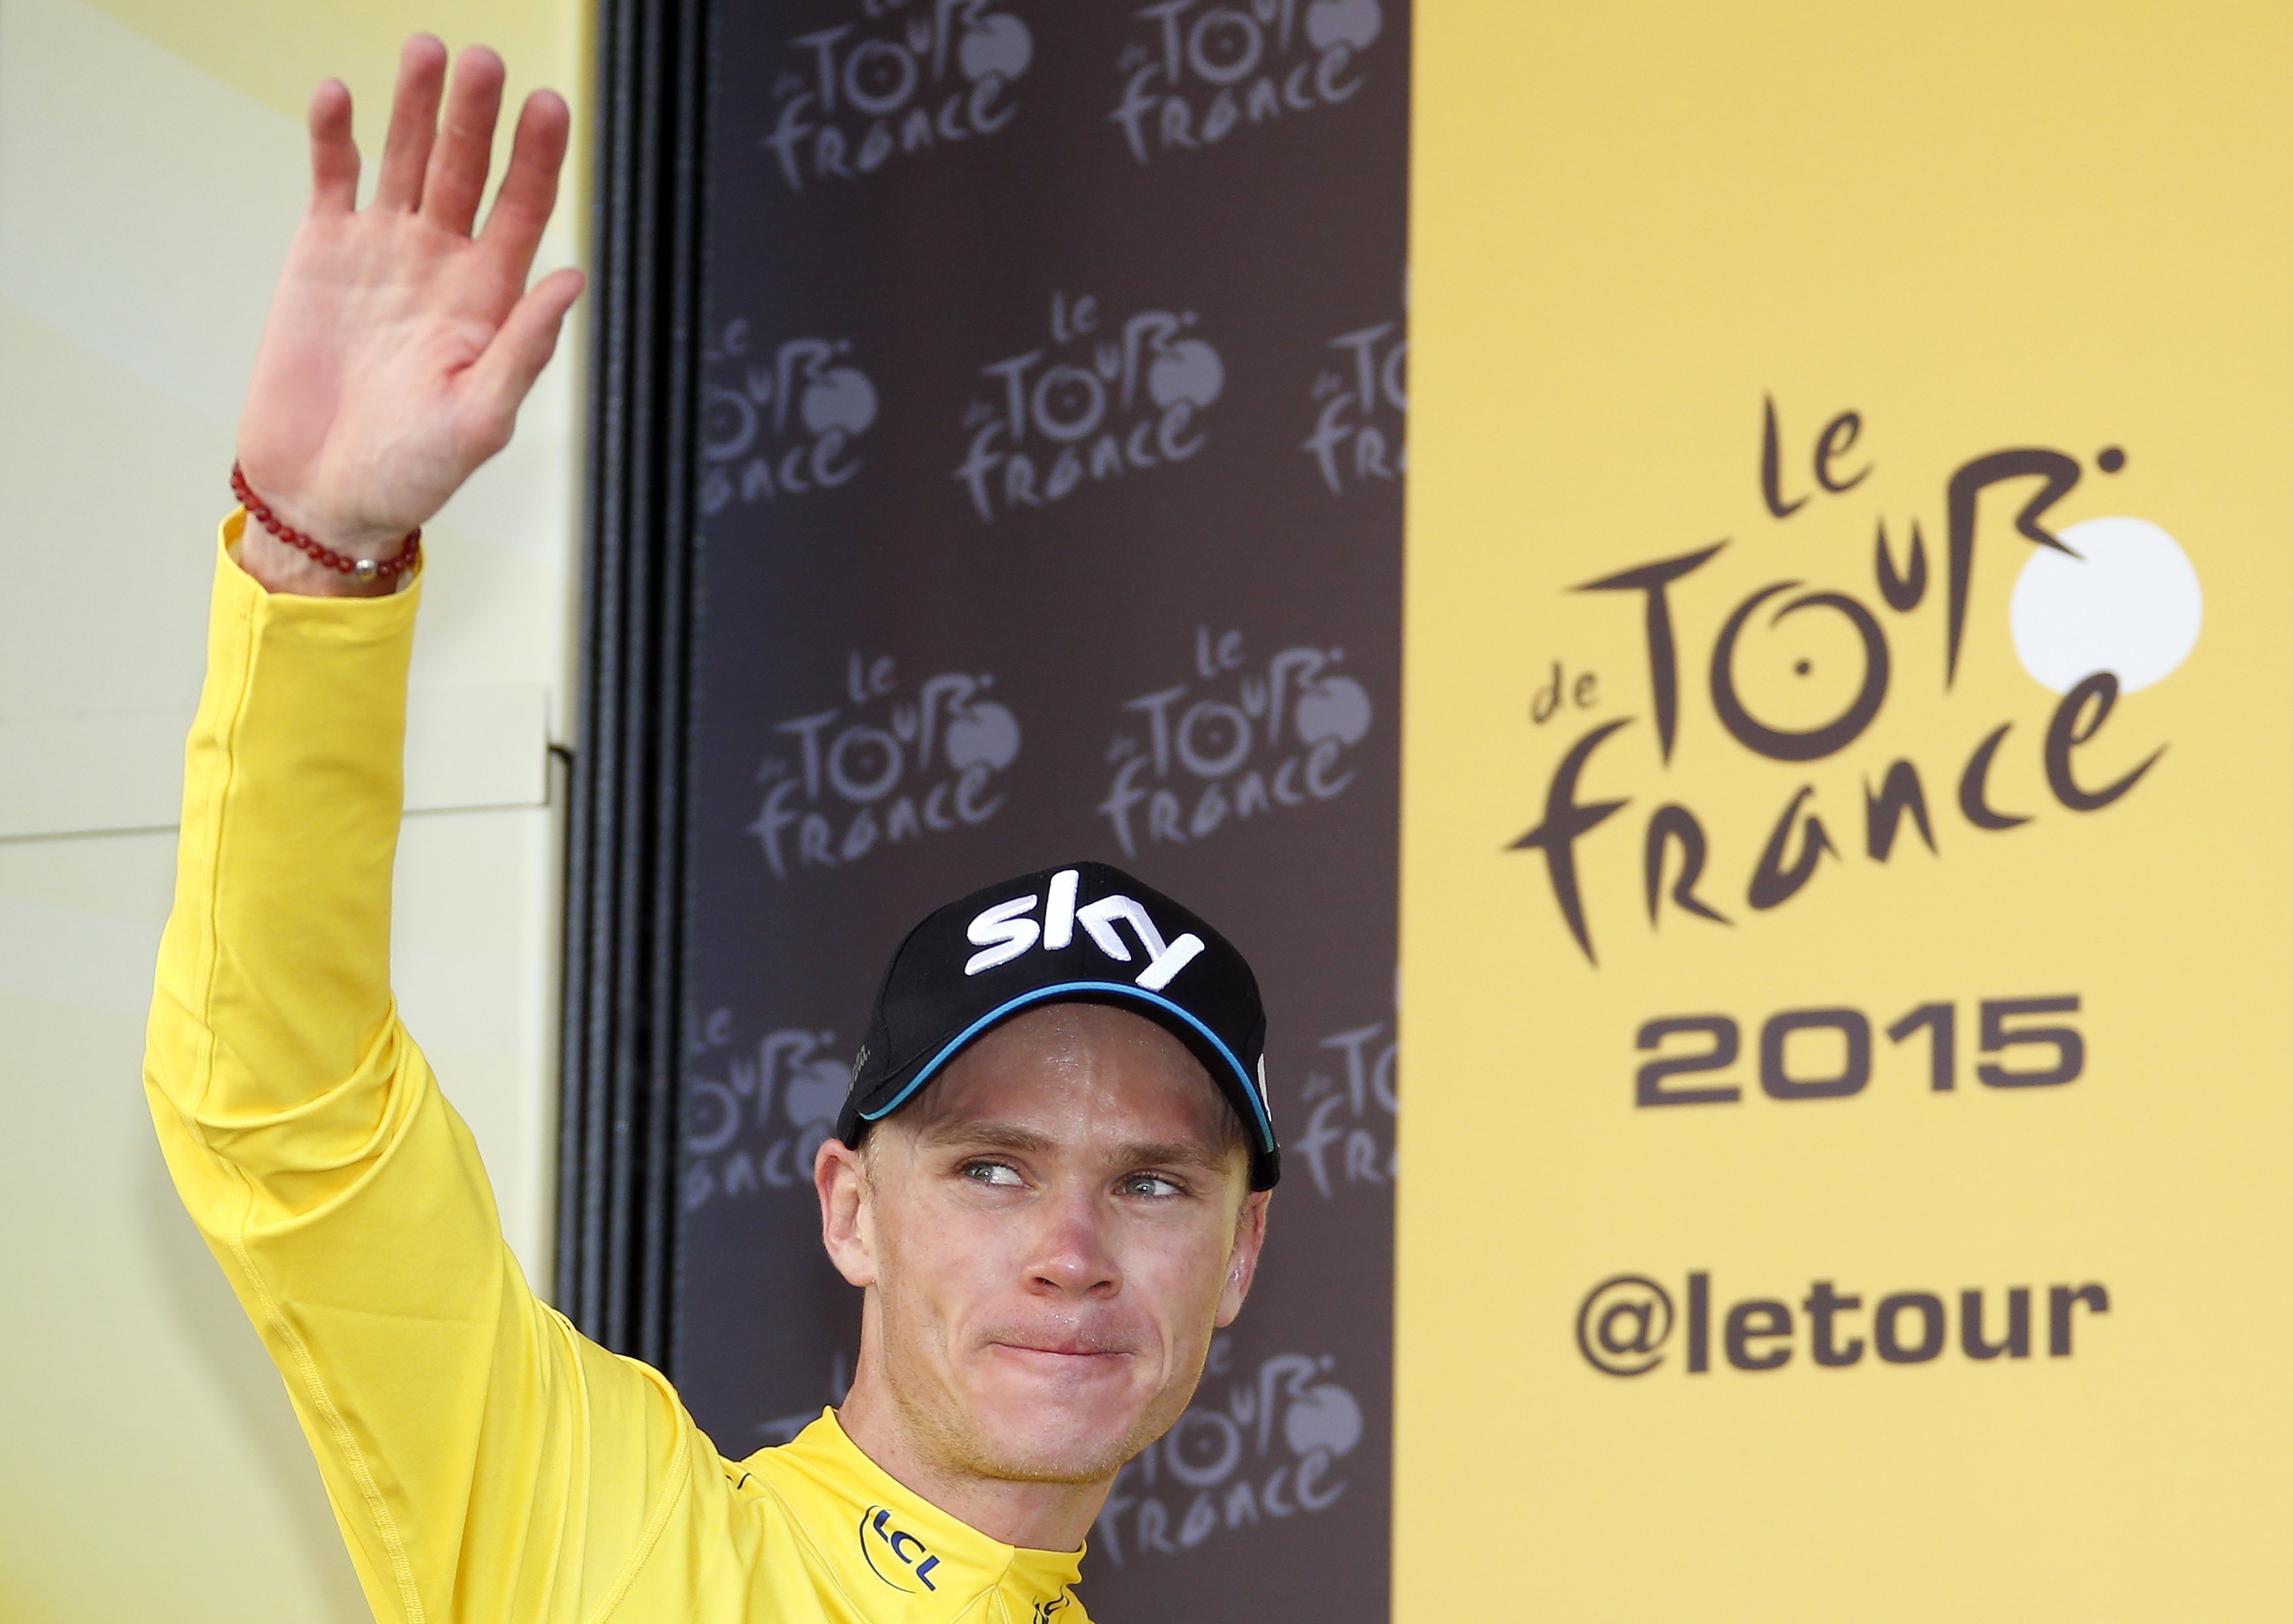 Chris Froome says he's totally clean. Photo: Reuters